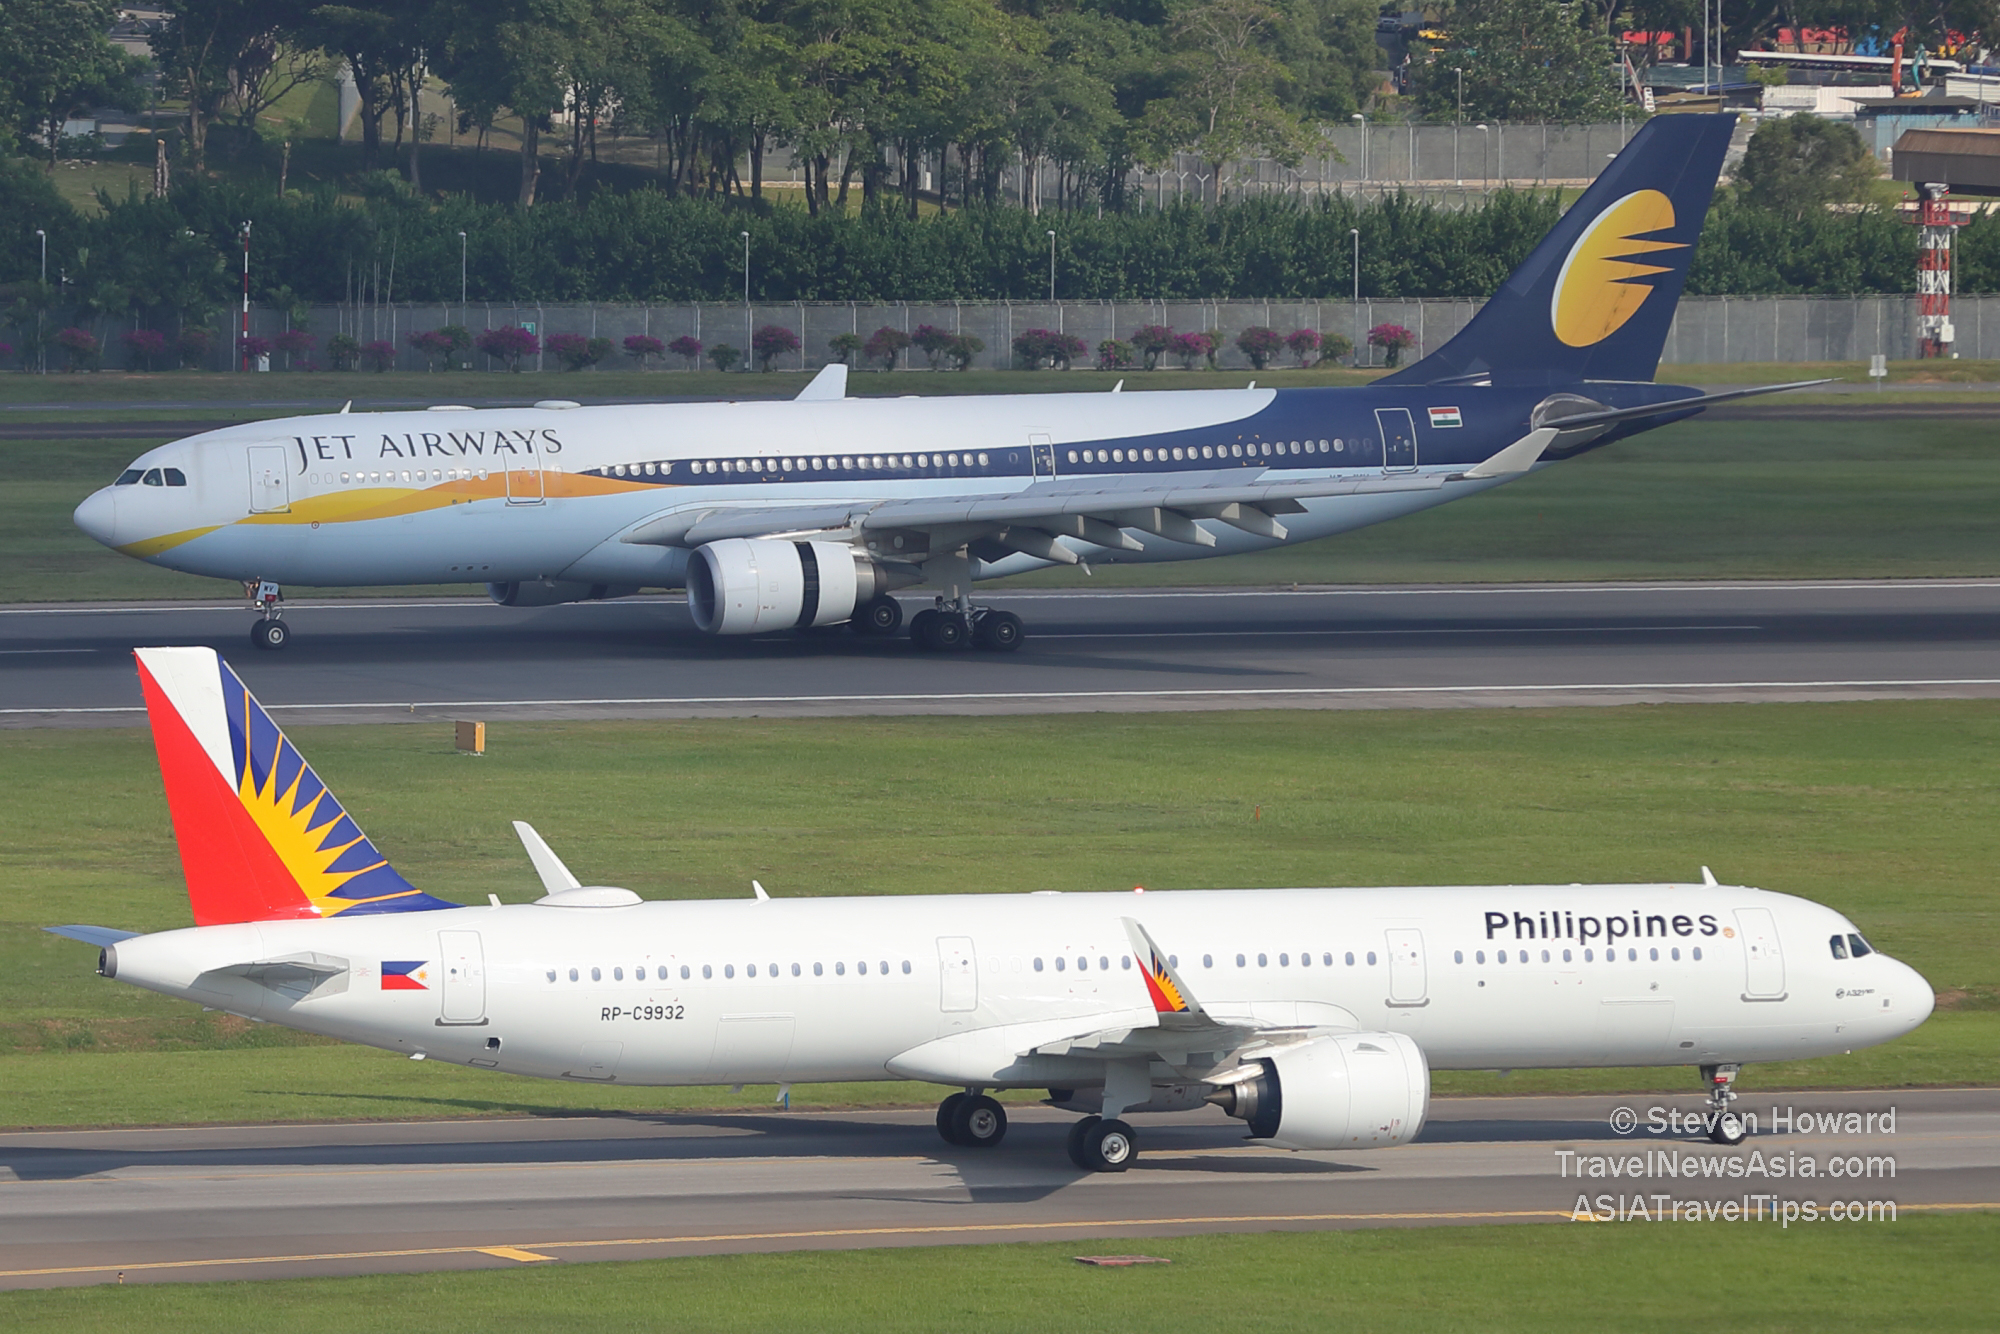 Jet Airways and Philippine Airlines at Changi Airport in Singapore. Picture by Steven Howard of TravelNewsAsia.com Click to enlarge.